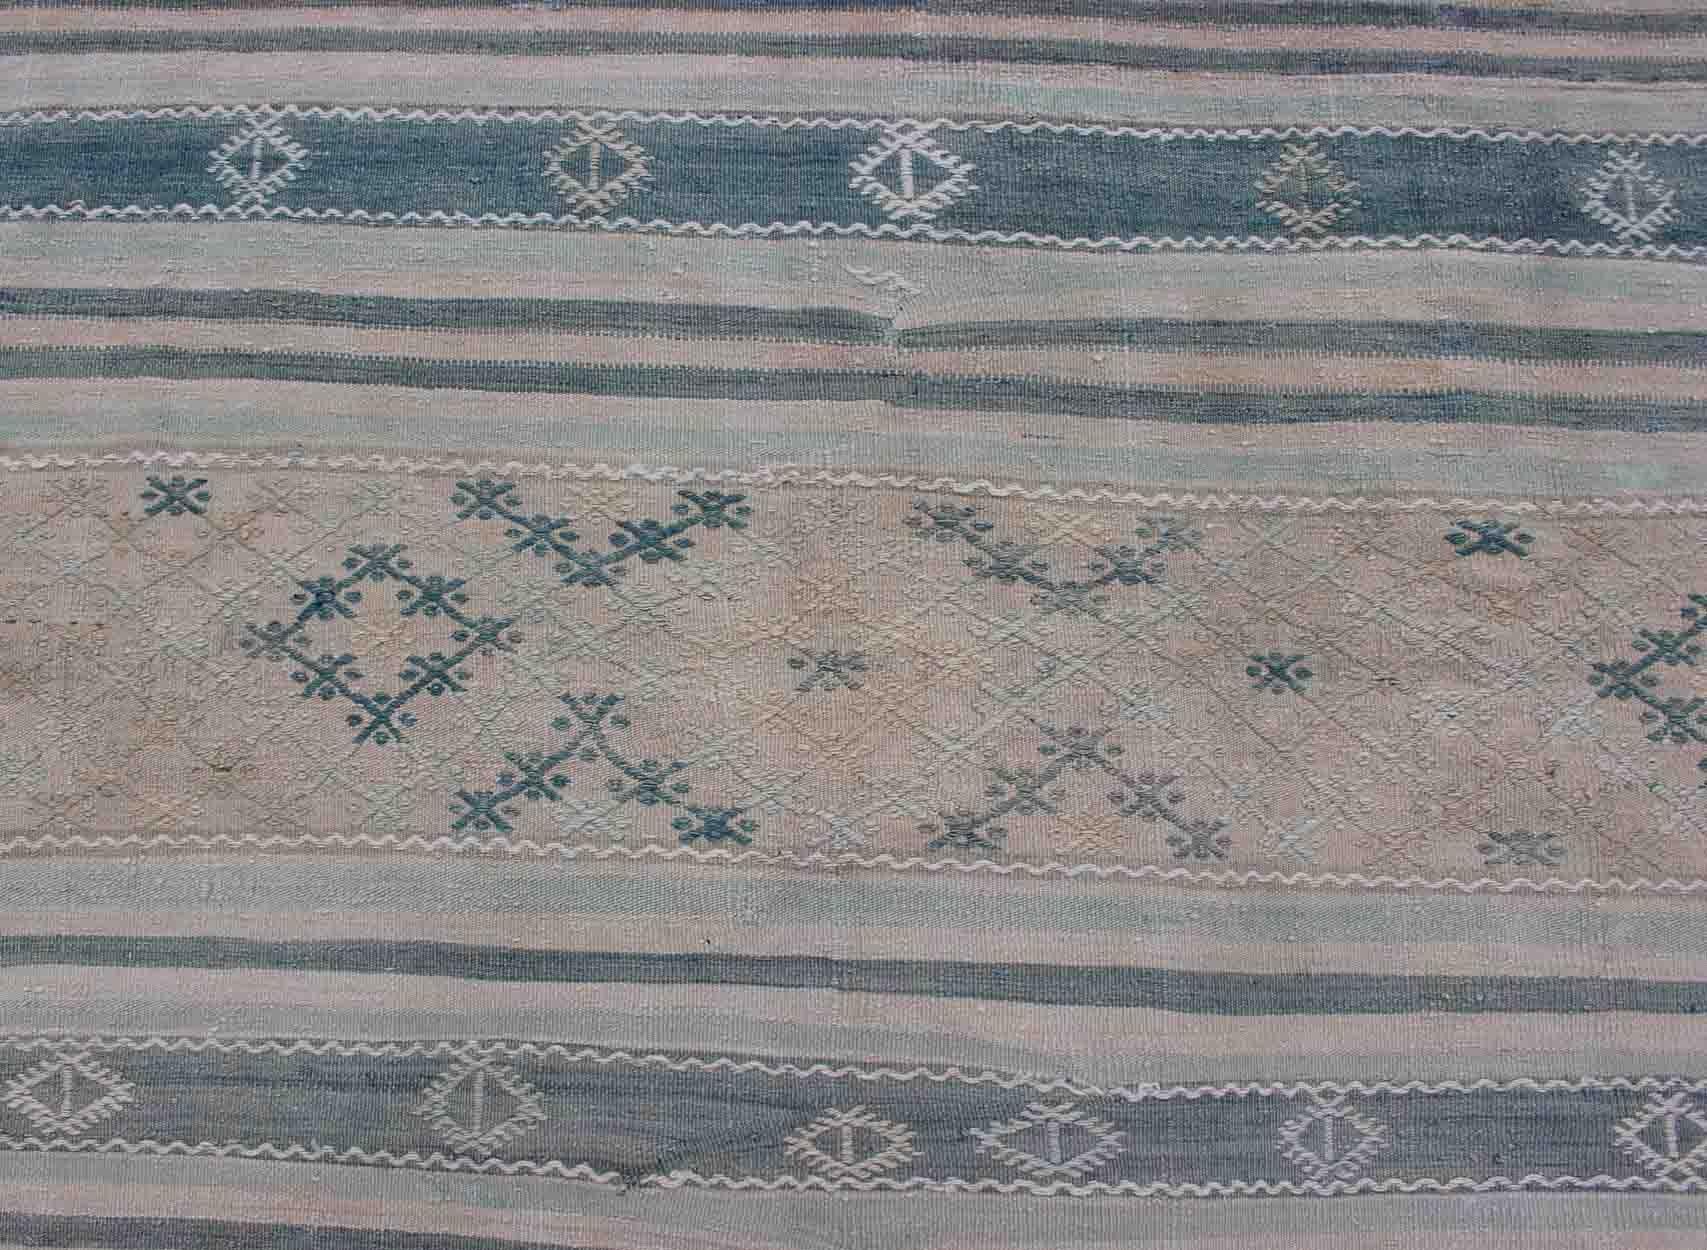 Mid-20th Century Vintage Turkish Flat-Weave Kilim with Embroideries in Diamonds and Stripes